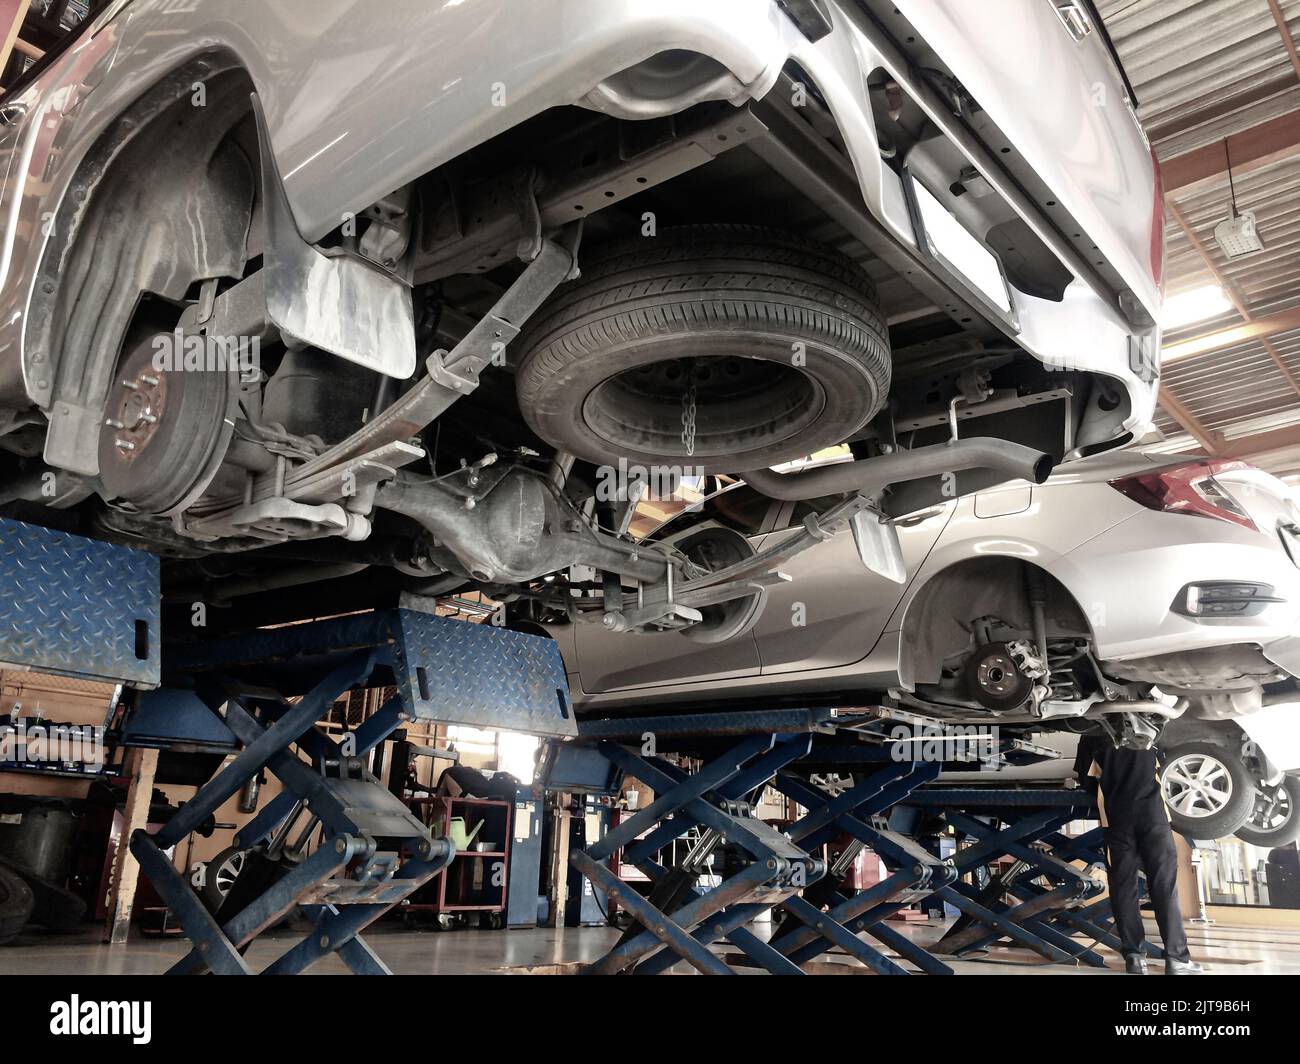 Pickup truck and sedan car in the process of changing wheels on the car lifts in a garage. Focus on the wheel hub. Stock Photo